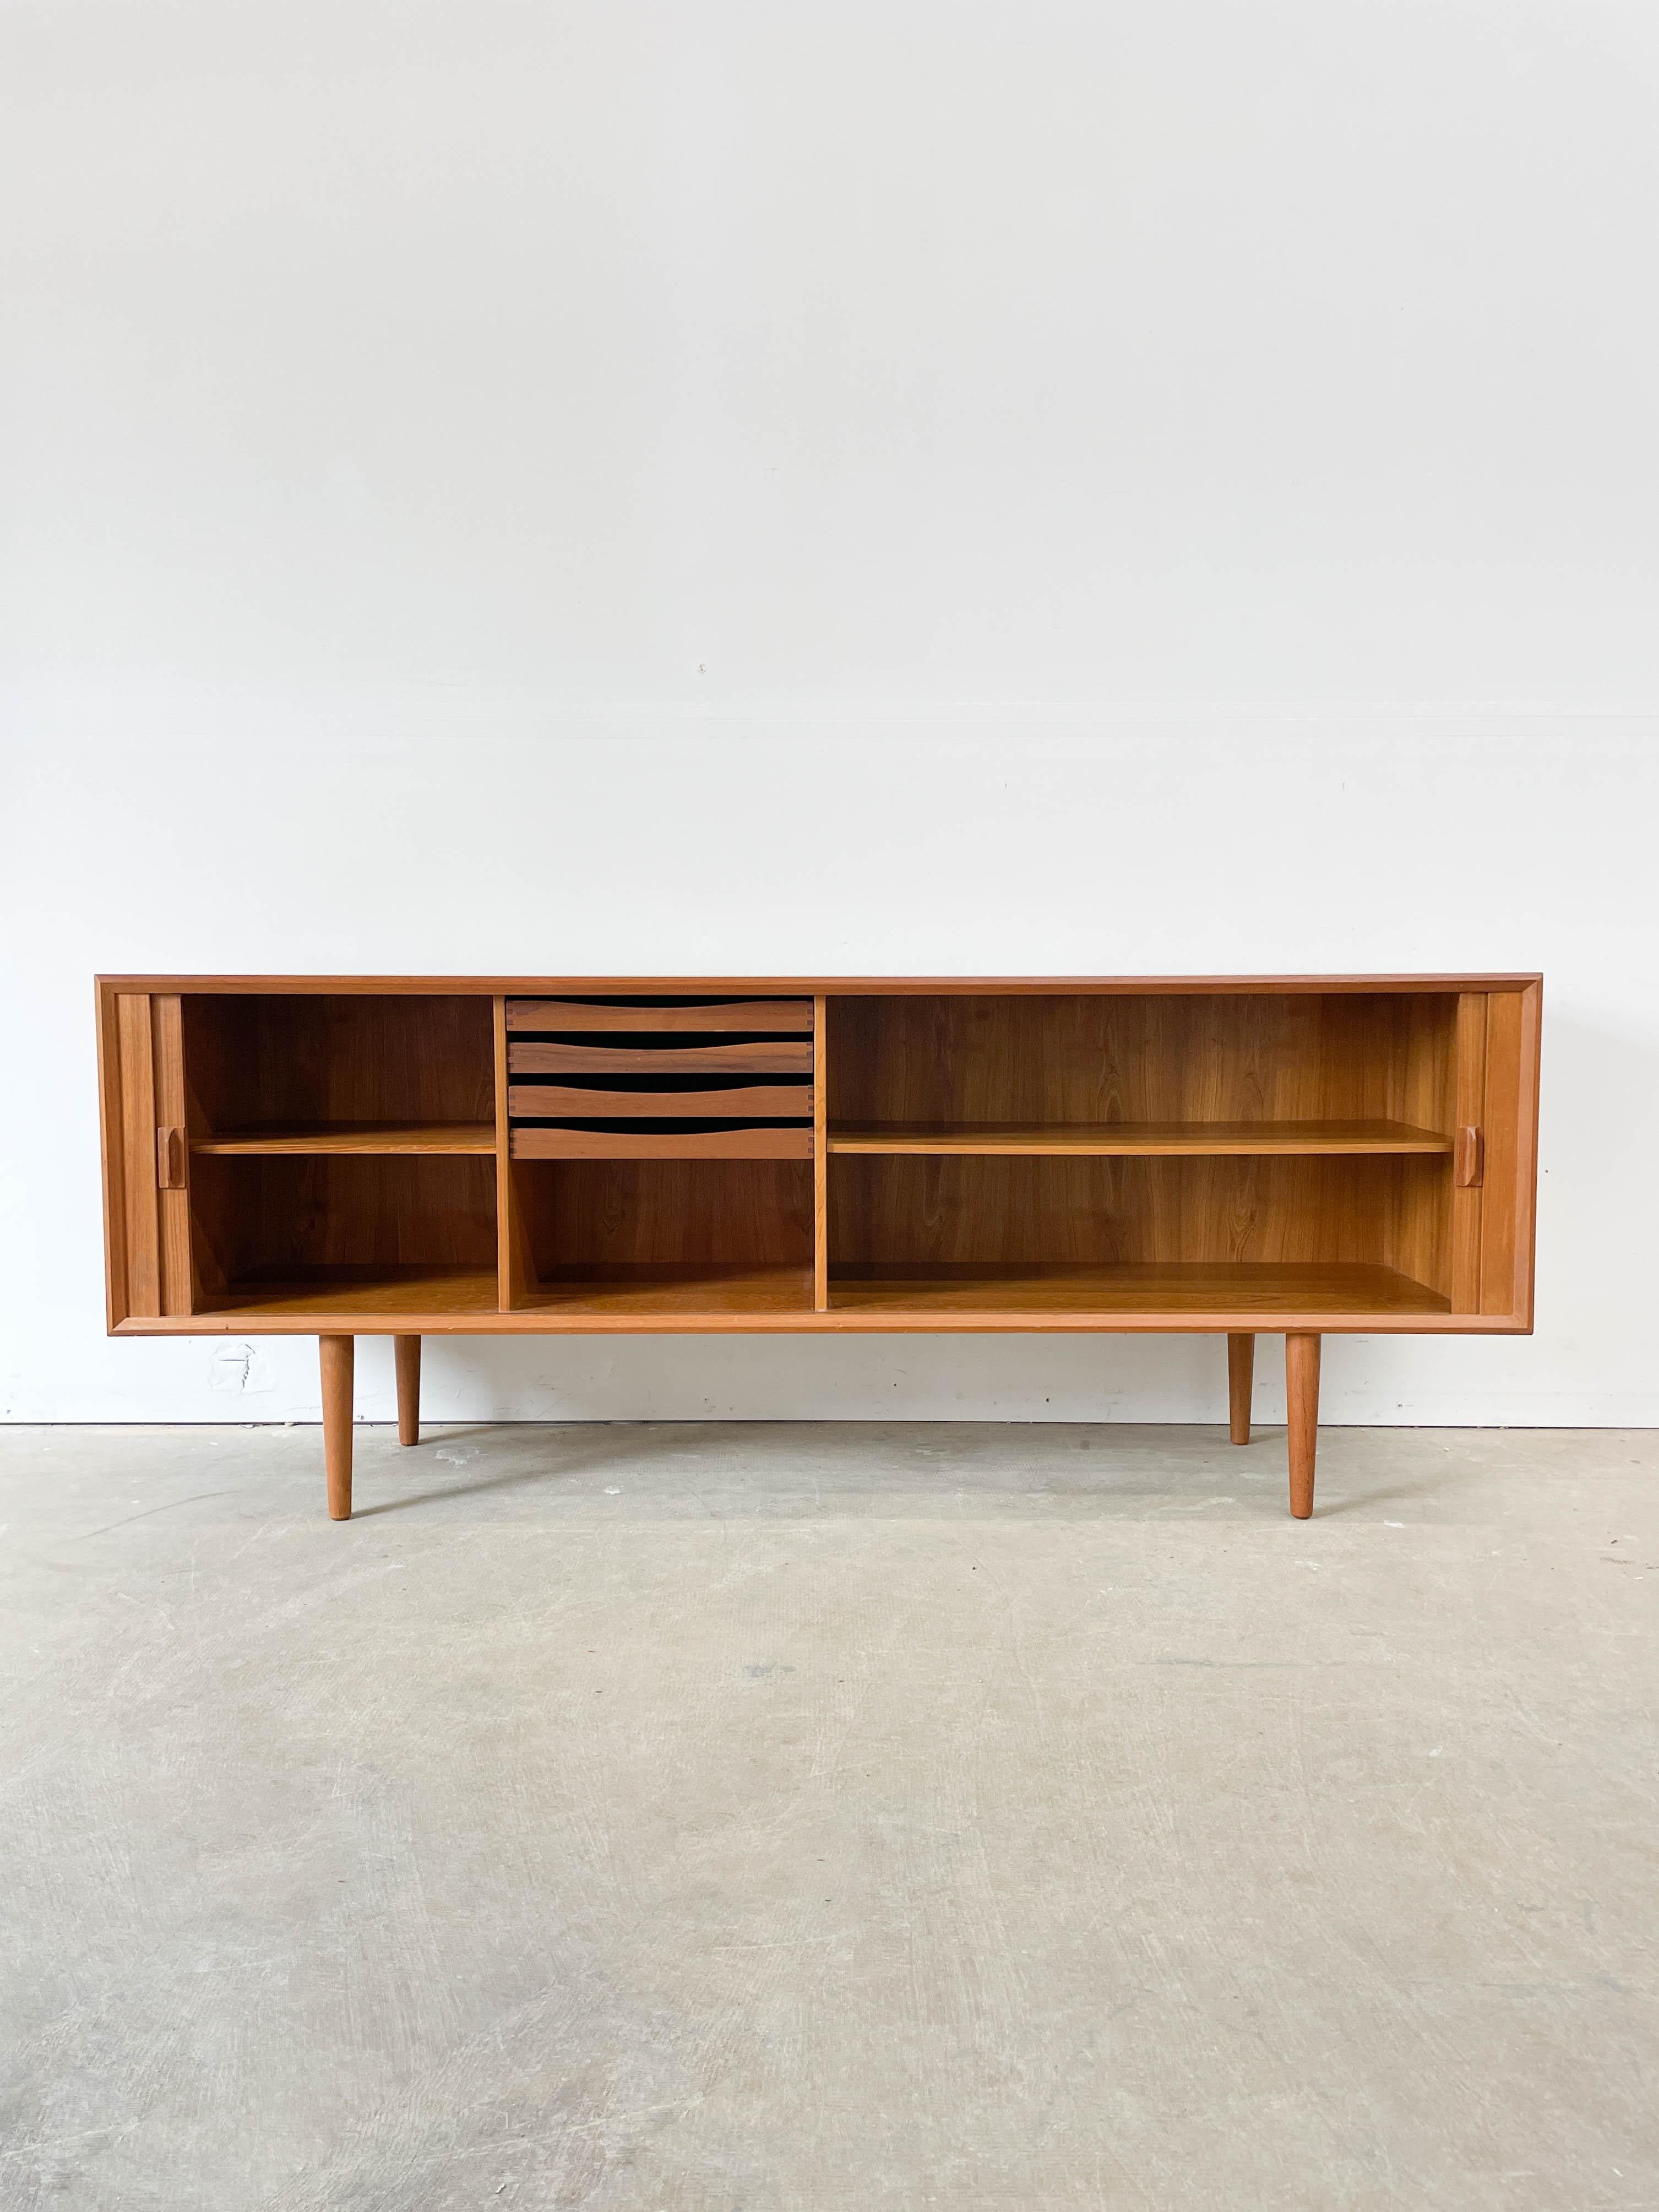 Stunning large teak credenza with tambour doors designed by Svend Larsen for Faarup Mobelfabrik in 1950s. Superb teak grain across the case but especially the doors and they slide effortlessly out of view. Excellent storage options with drawers and